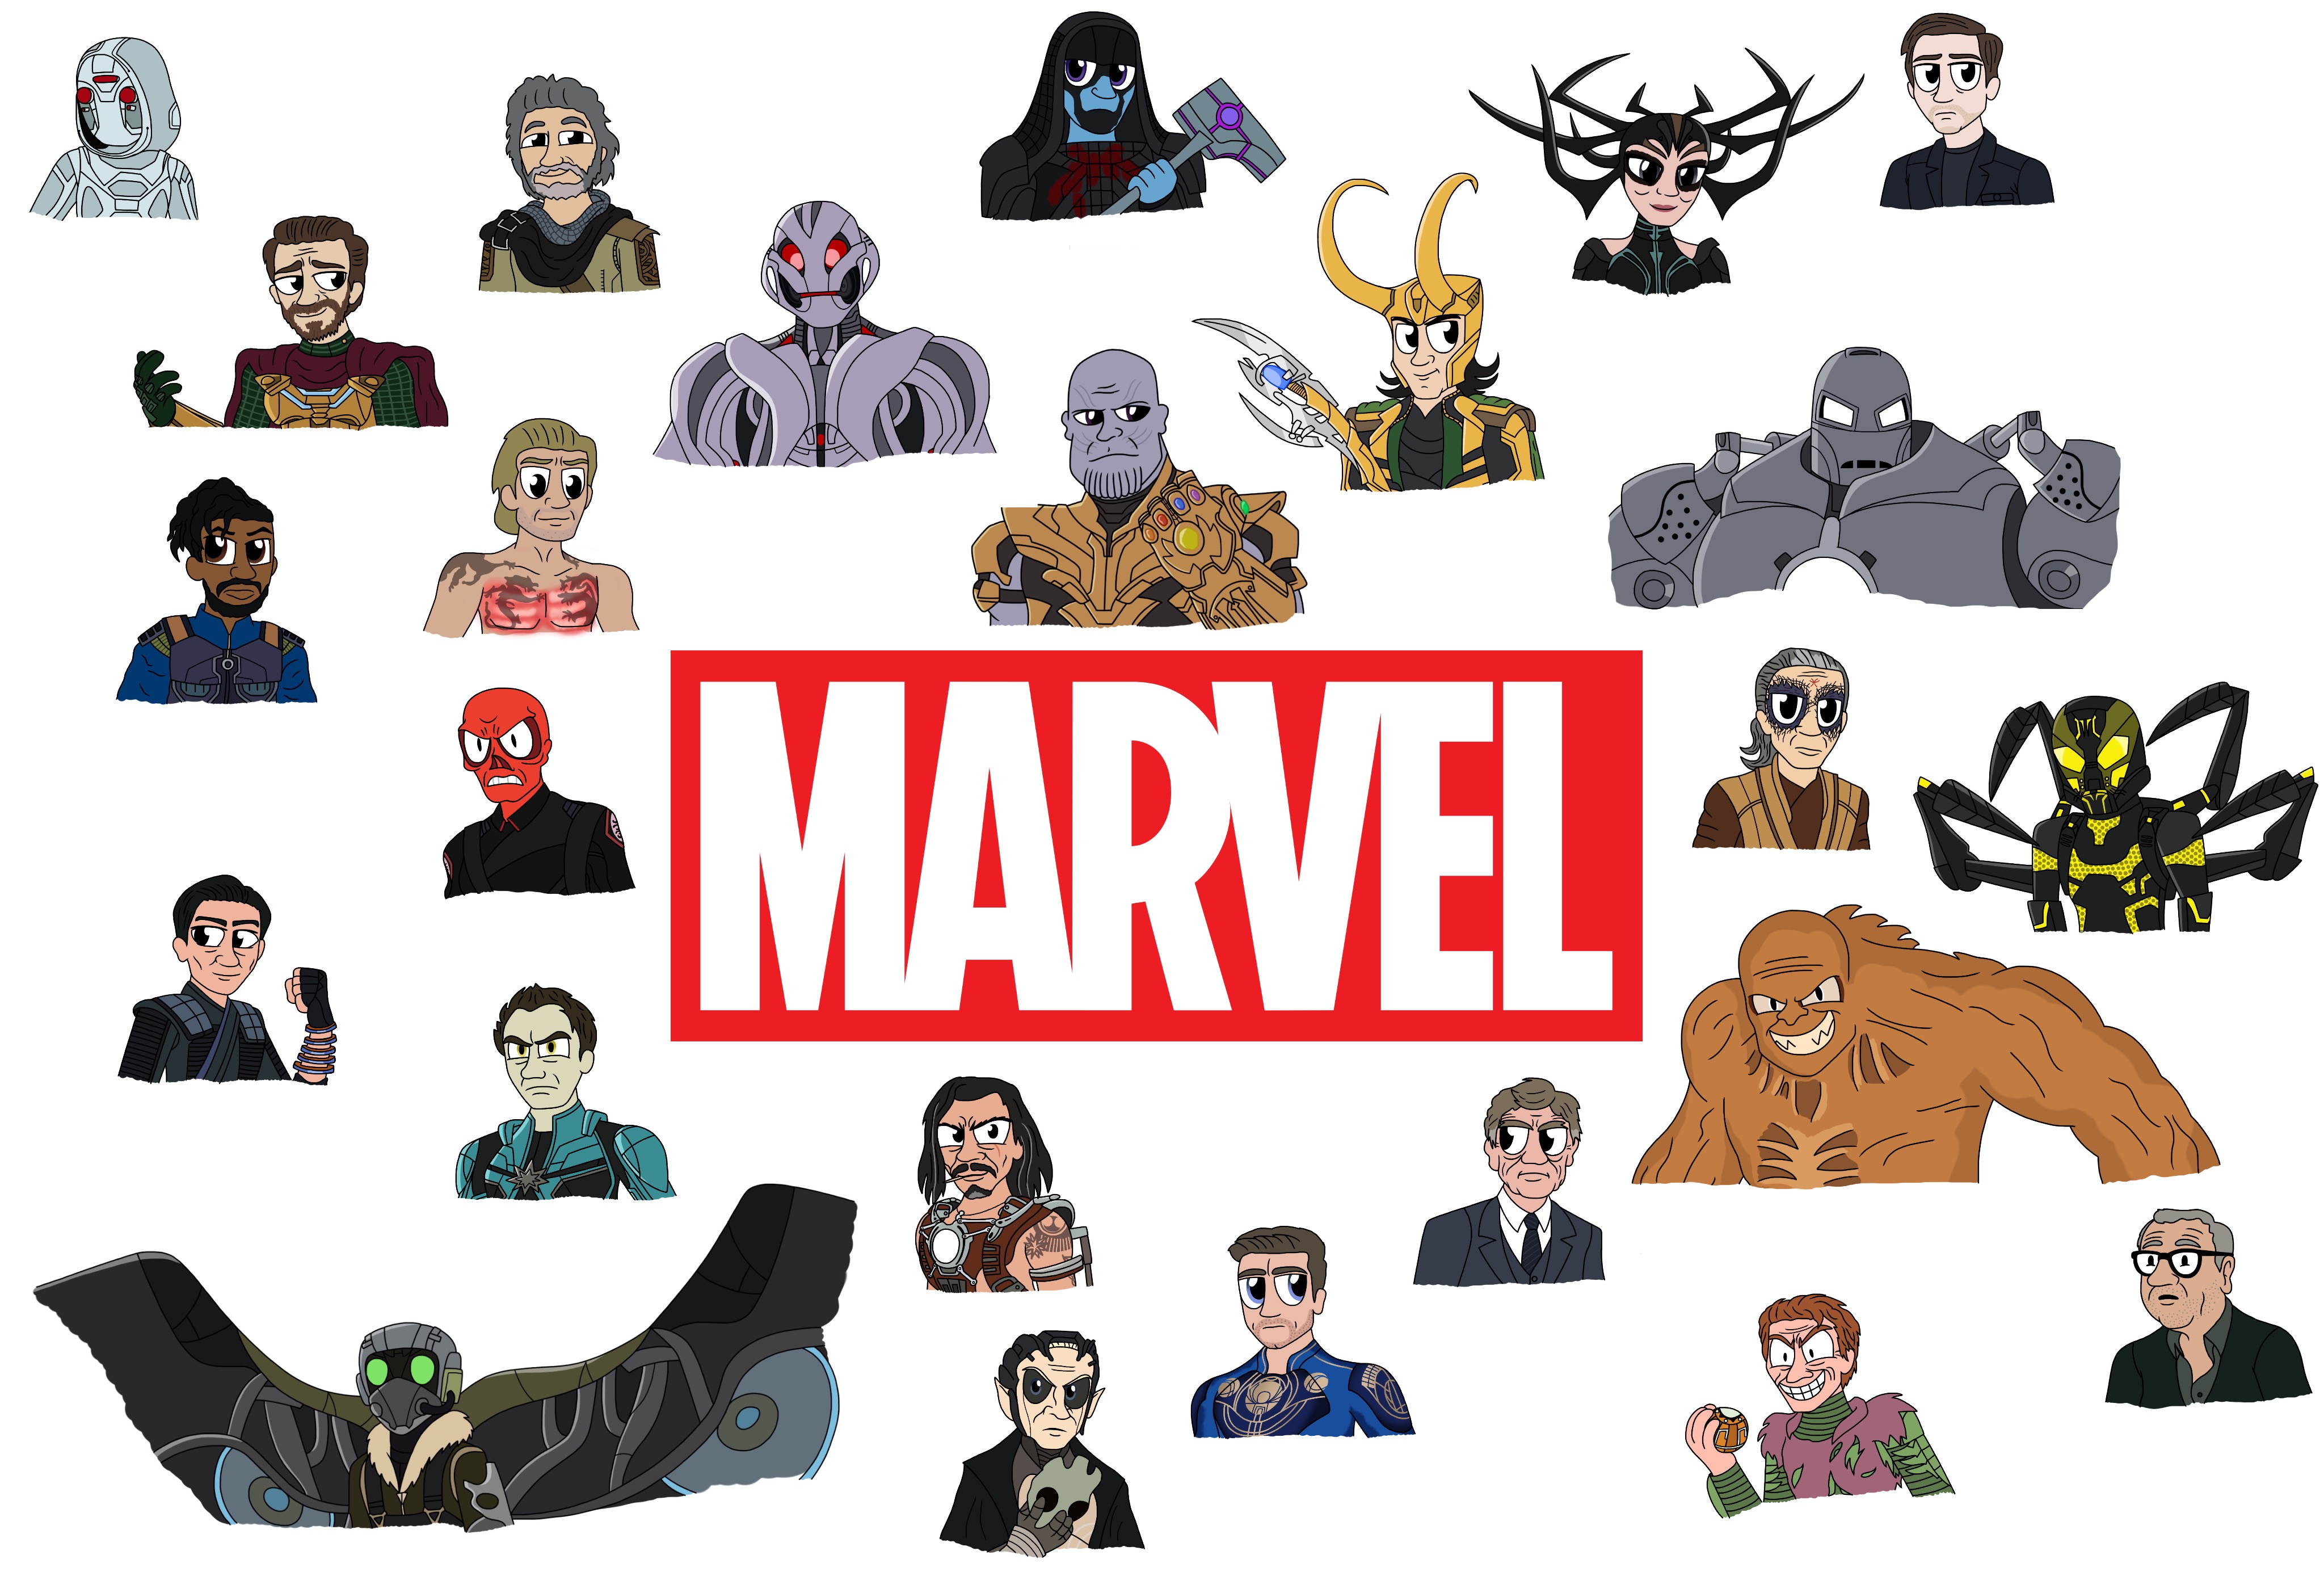 Marvels (Marvel Cinematic Universe), Heroes and Villains Wiki